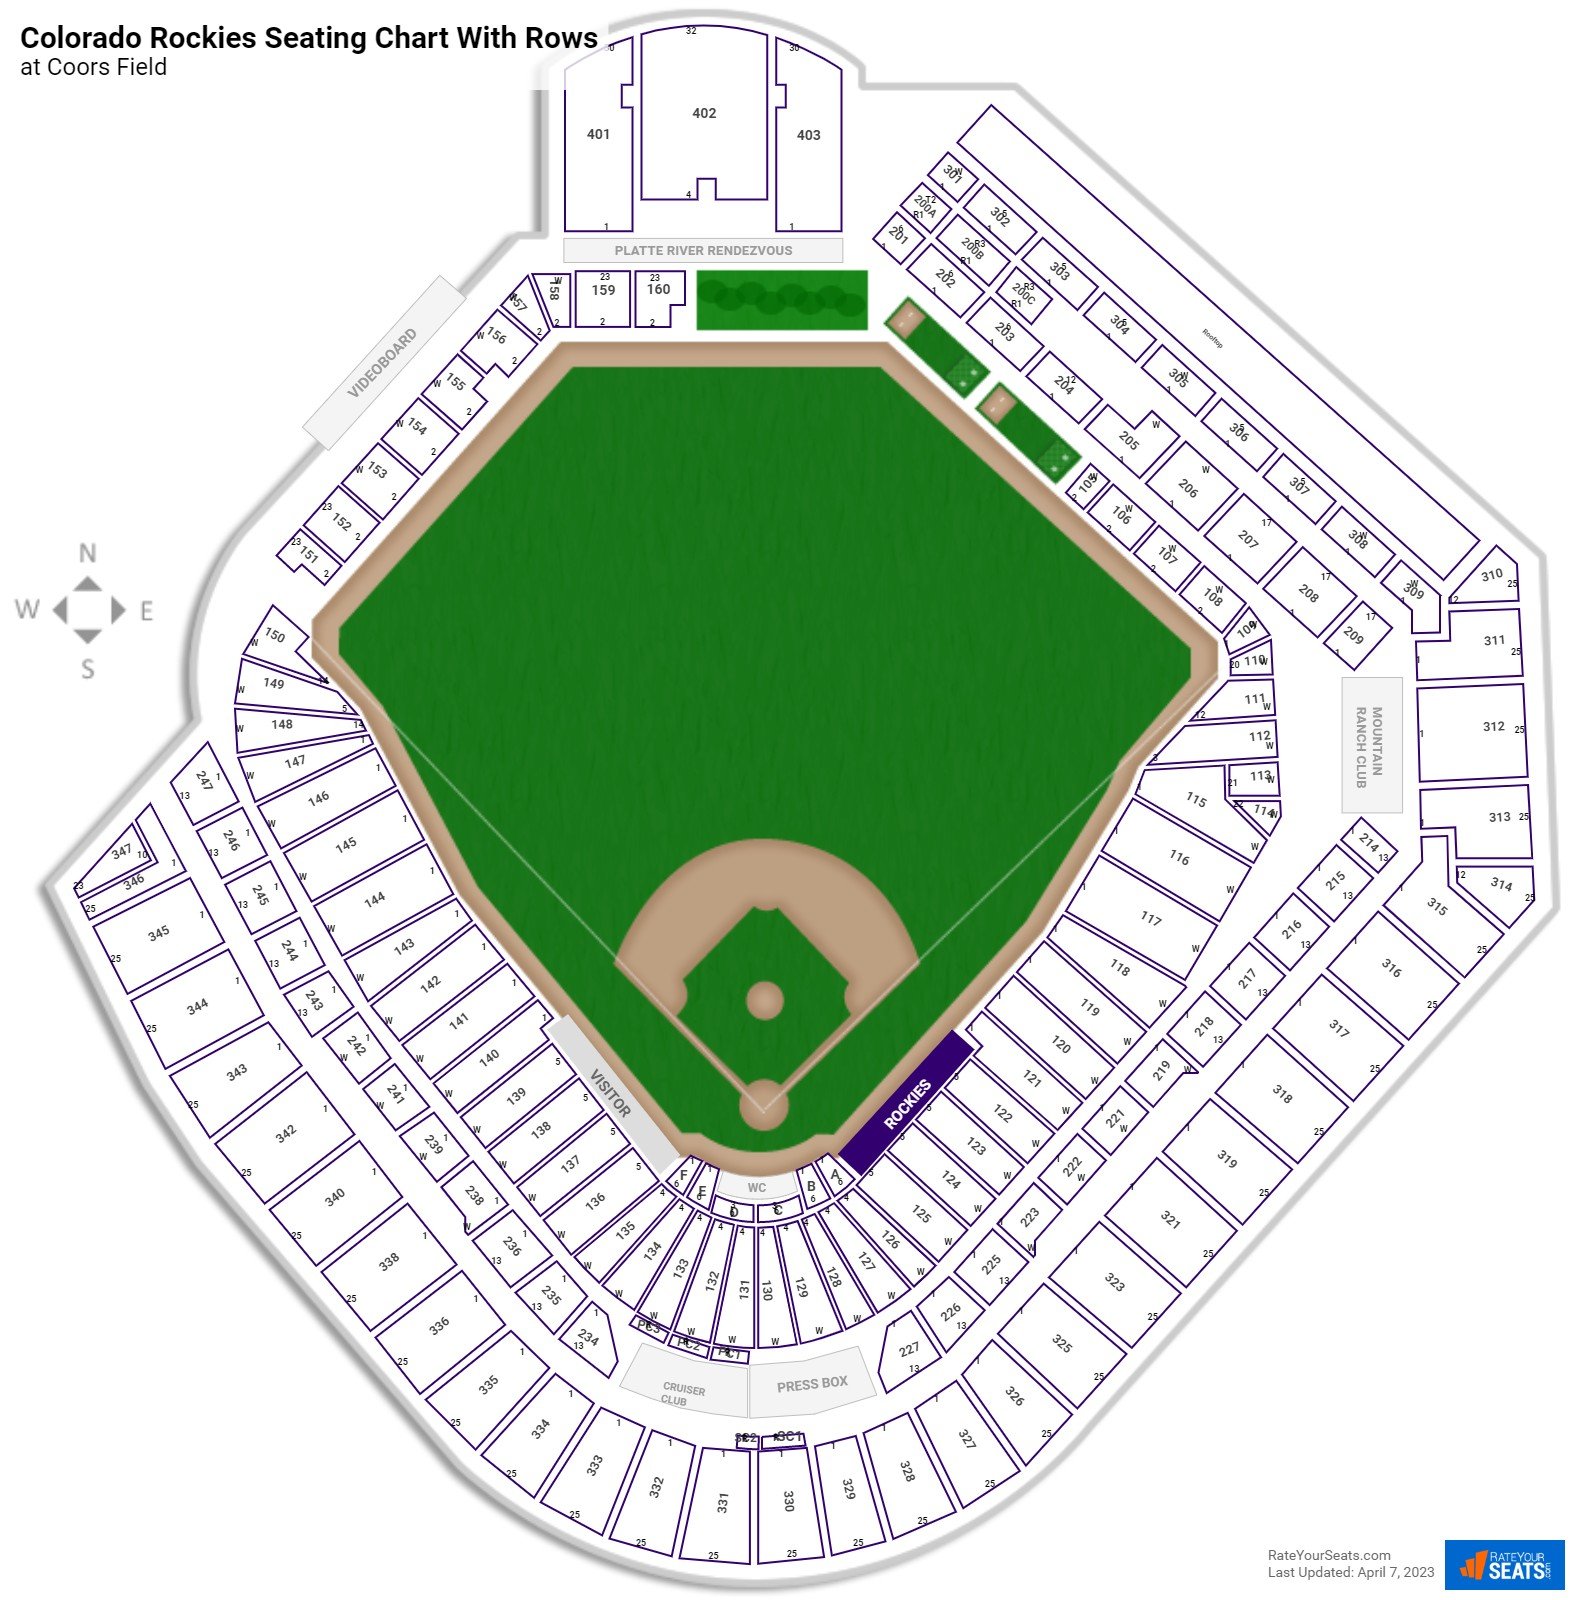 Coors Field Seating Chart Rateyourseats Com